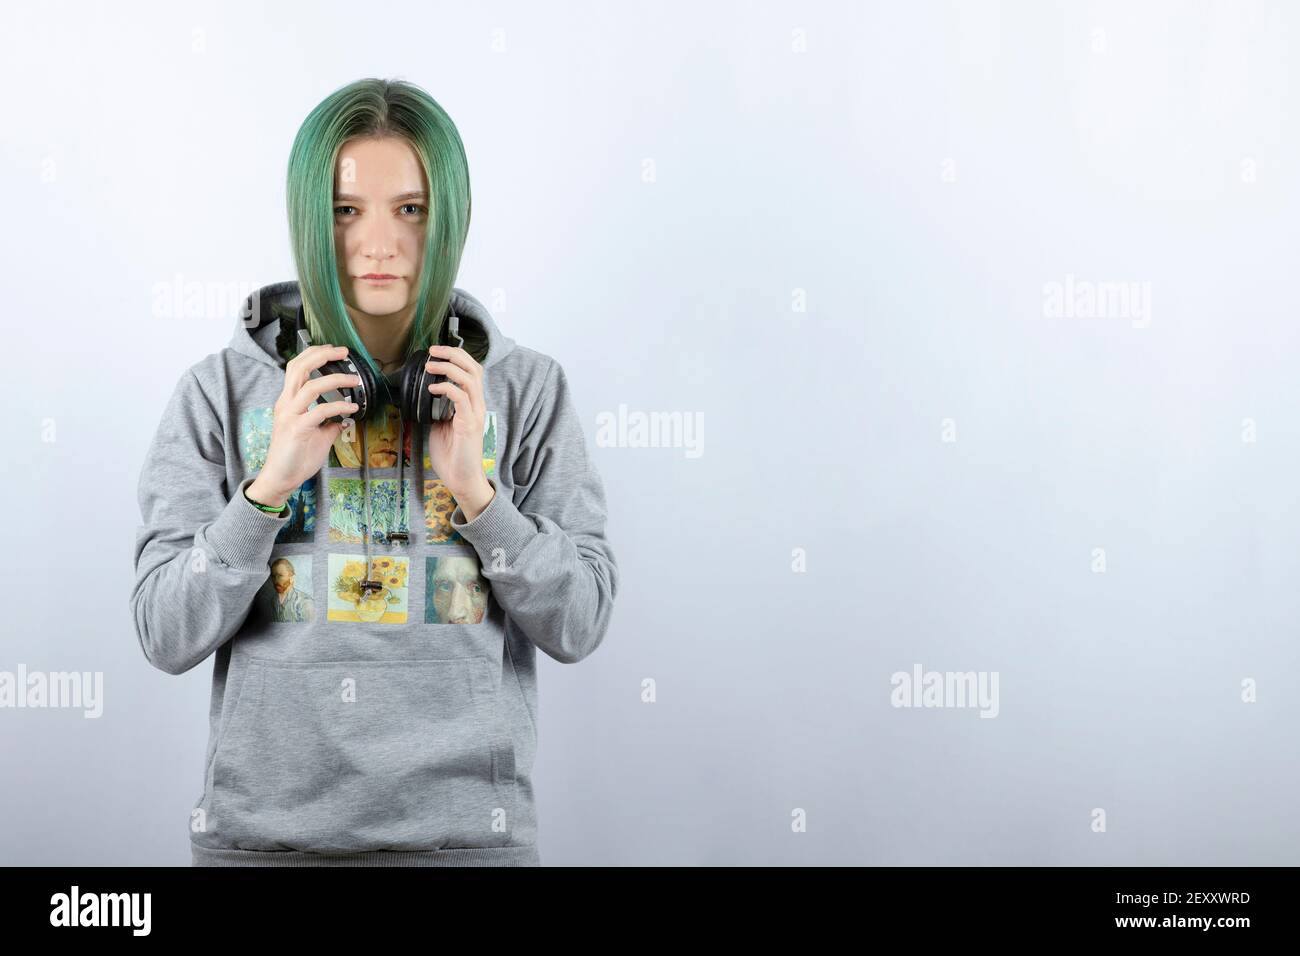 Photo of a young girl with green hair holding headphones Stock Photo